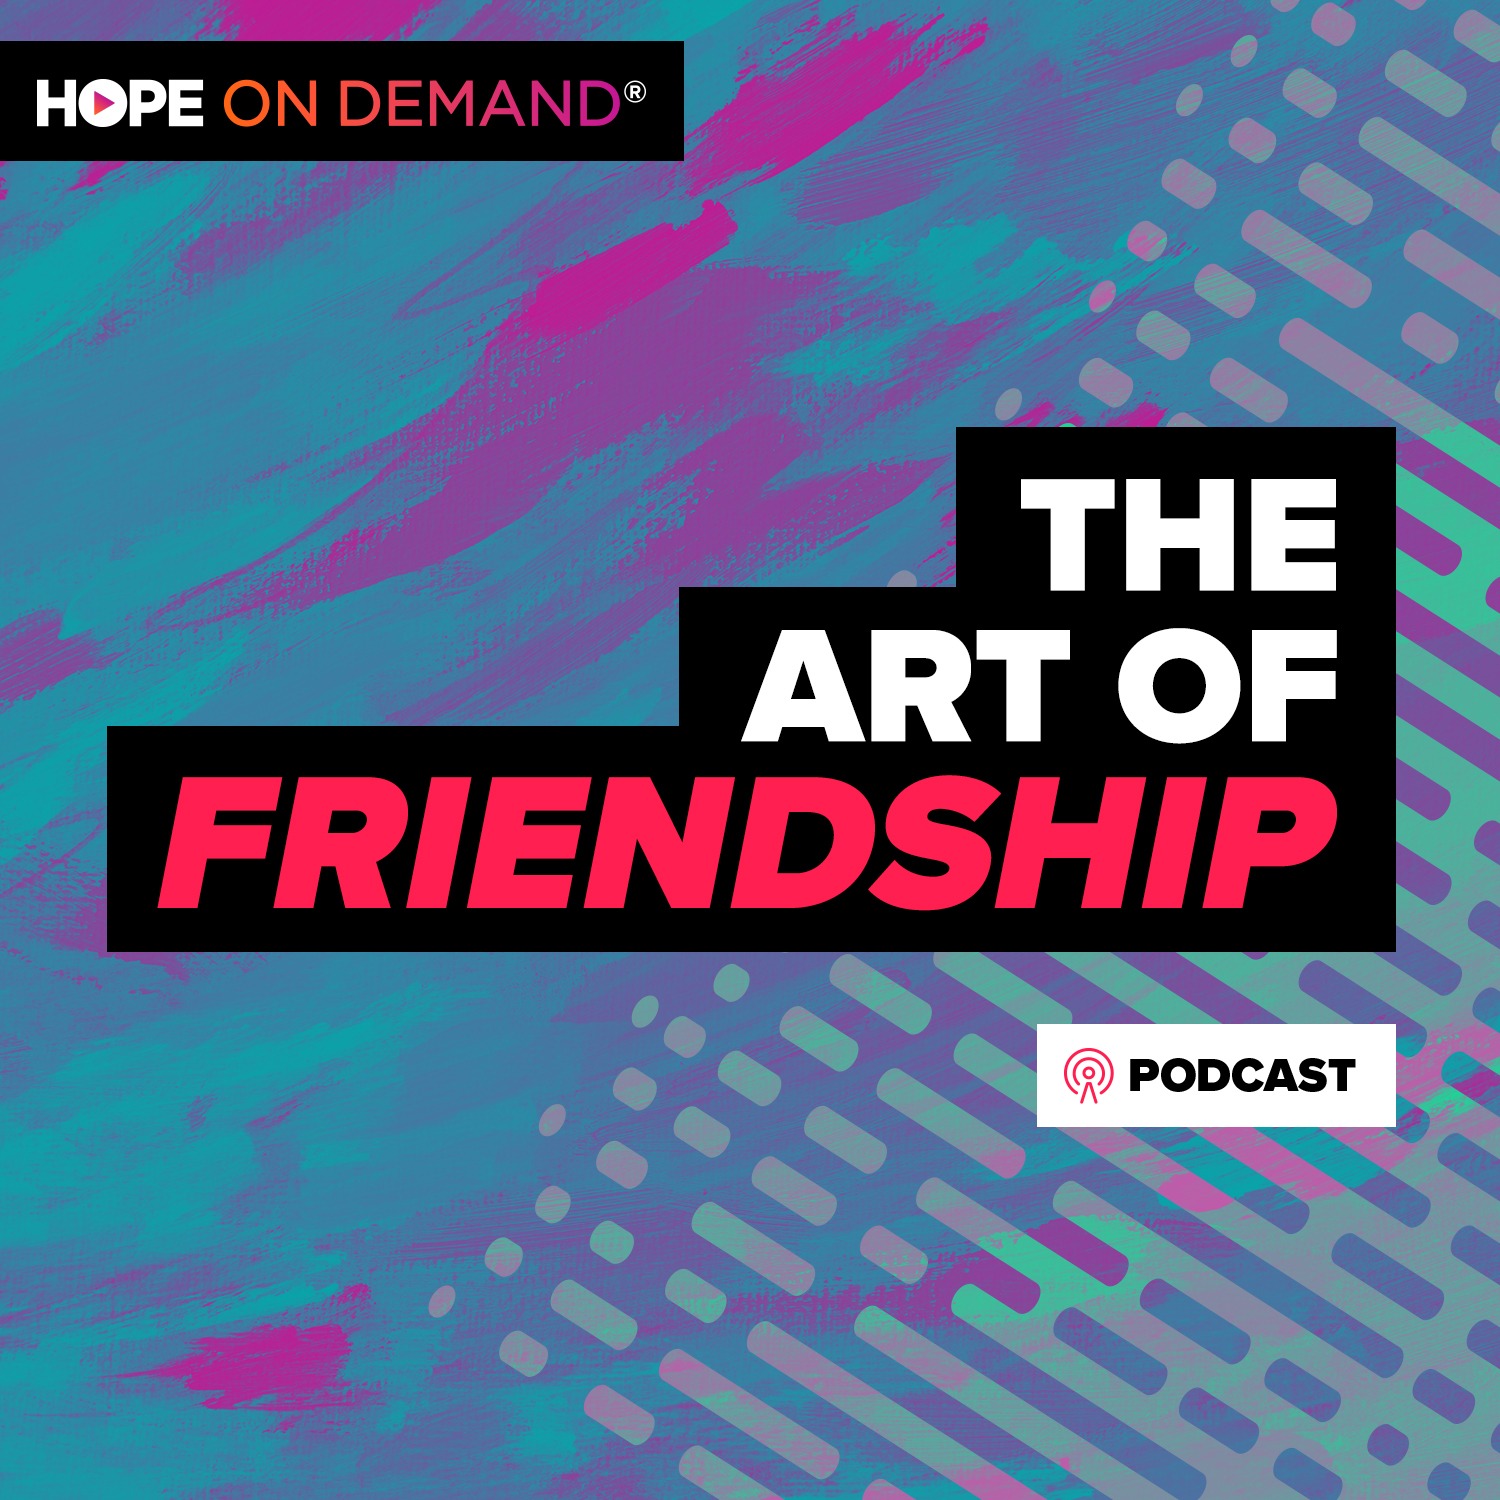 The Art of Friendship Podcast